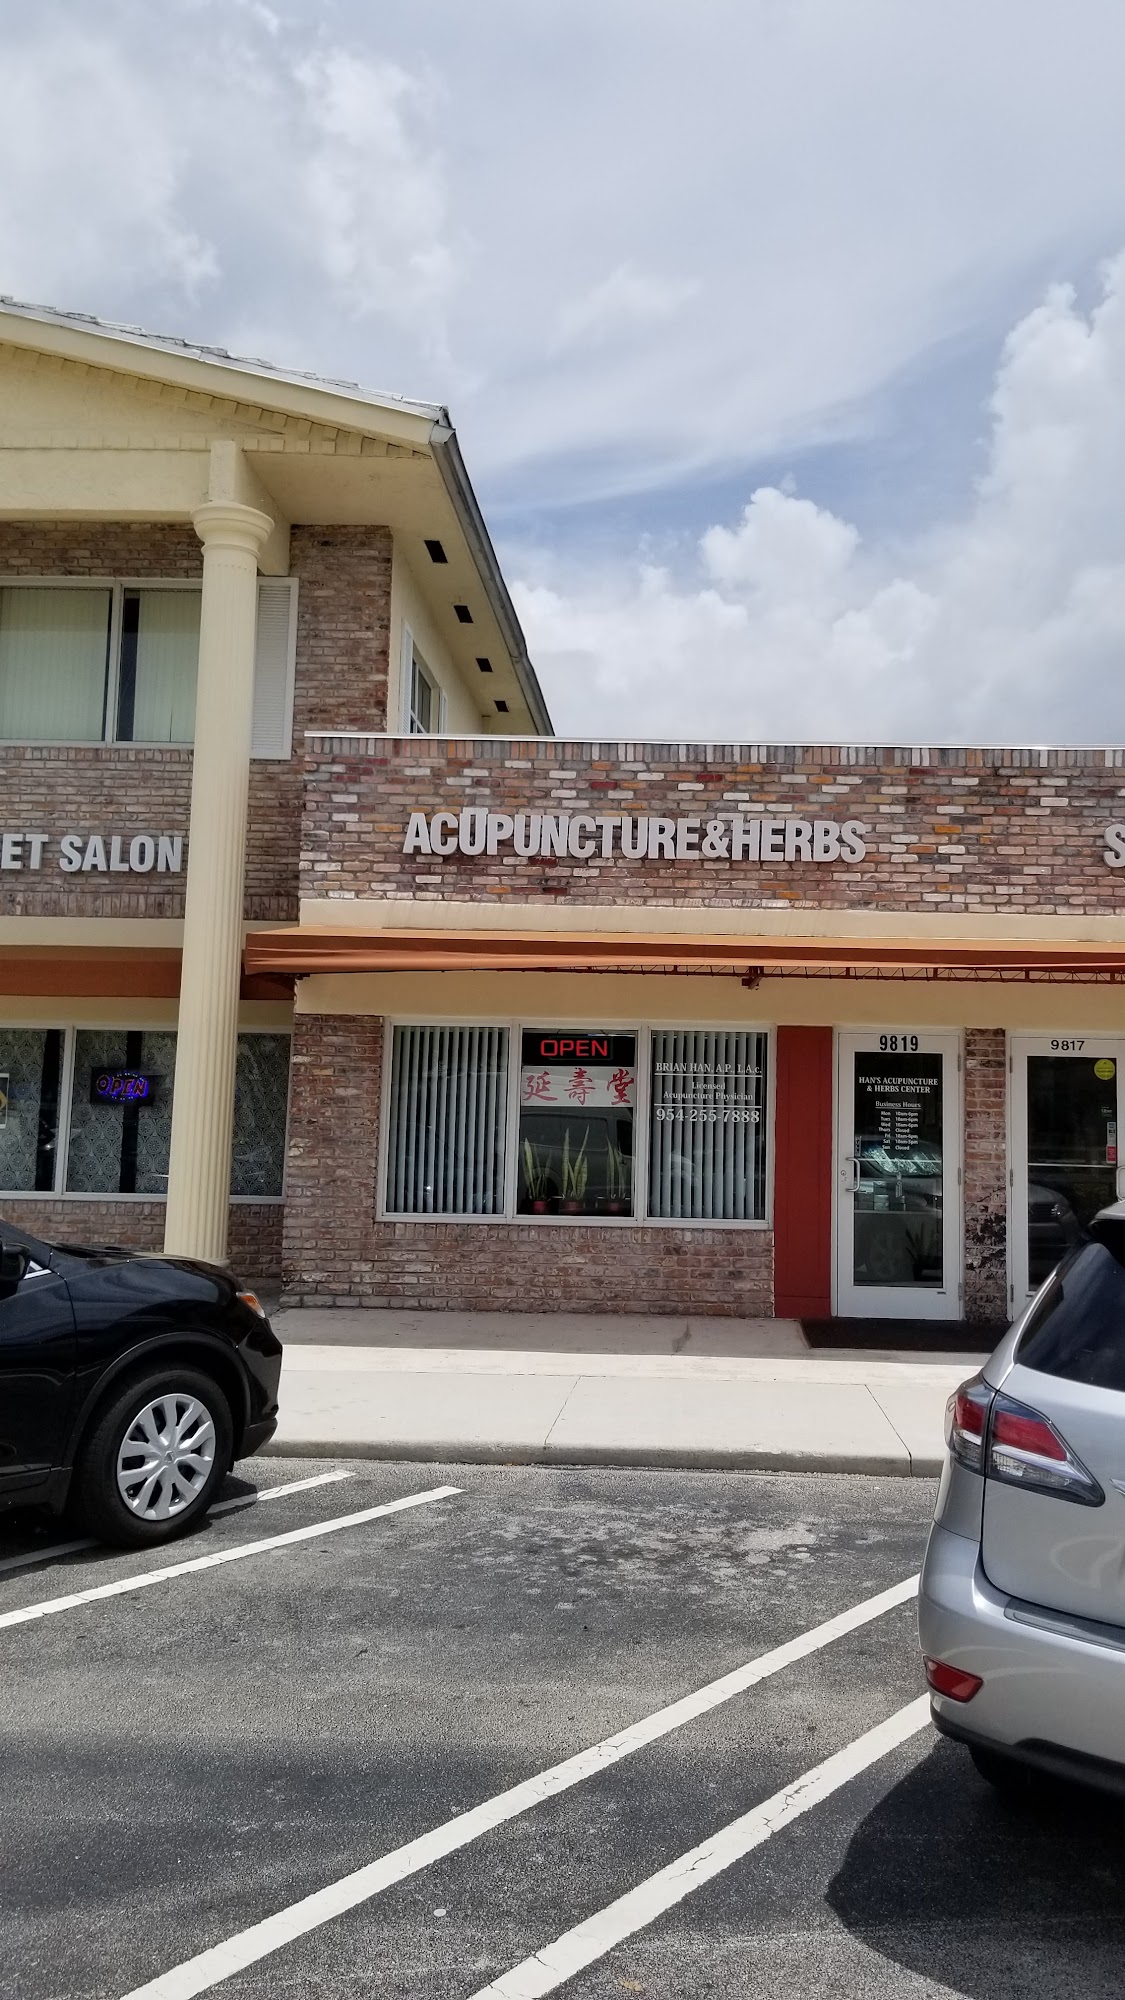 Brian Acupuncture & Herbs